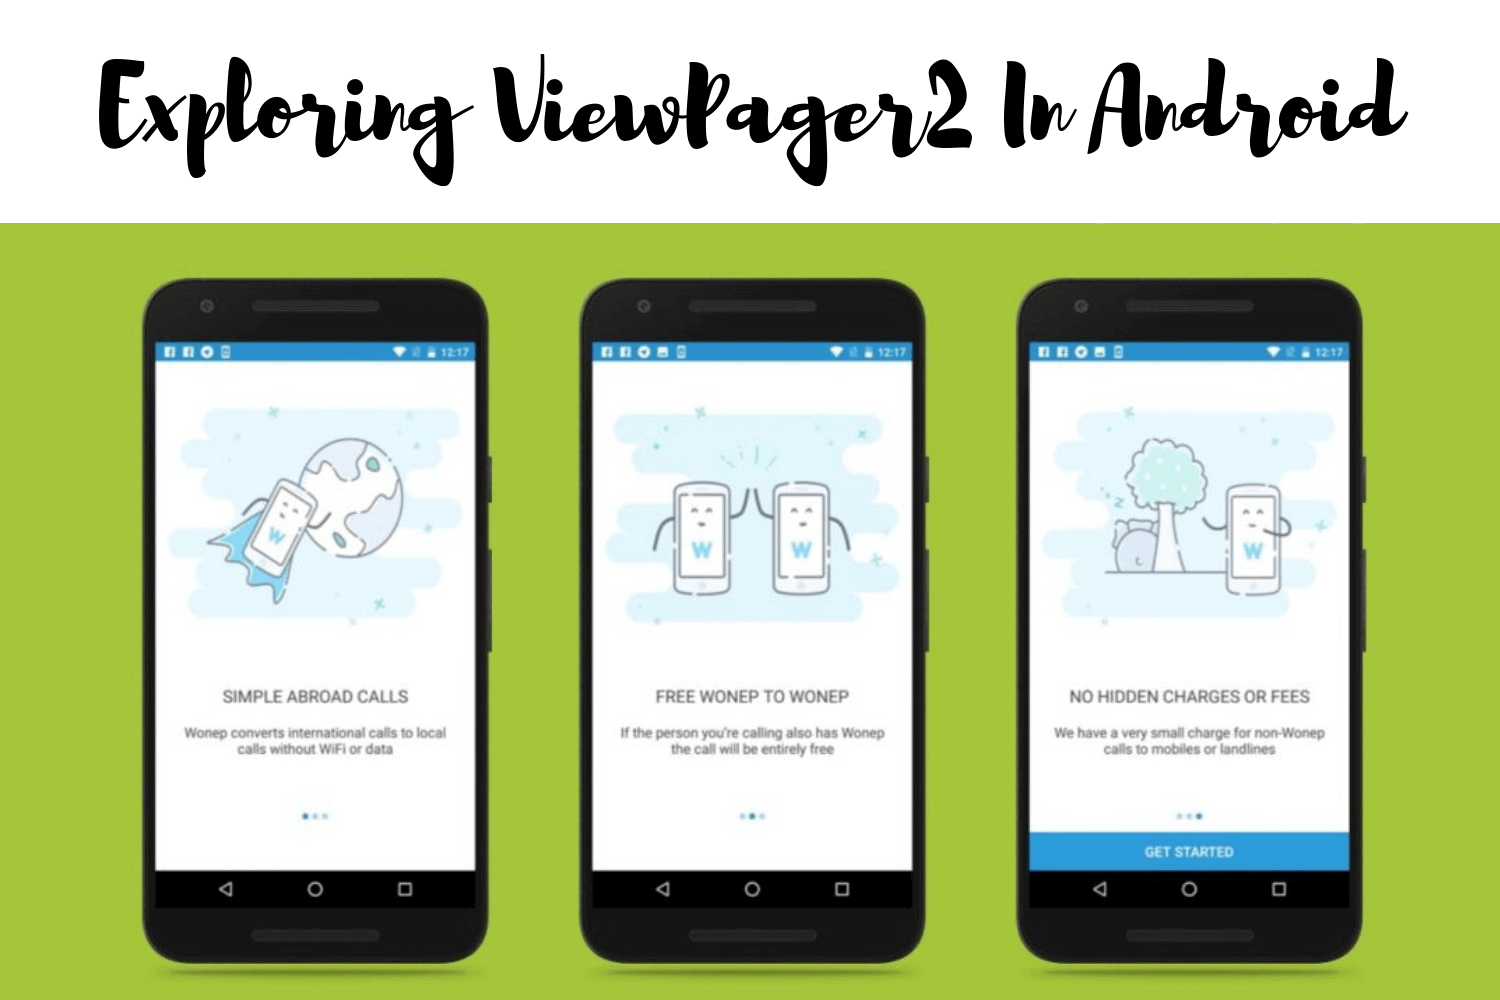 Exploring Android ViewPager2 in Android